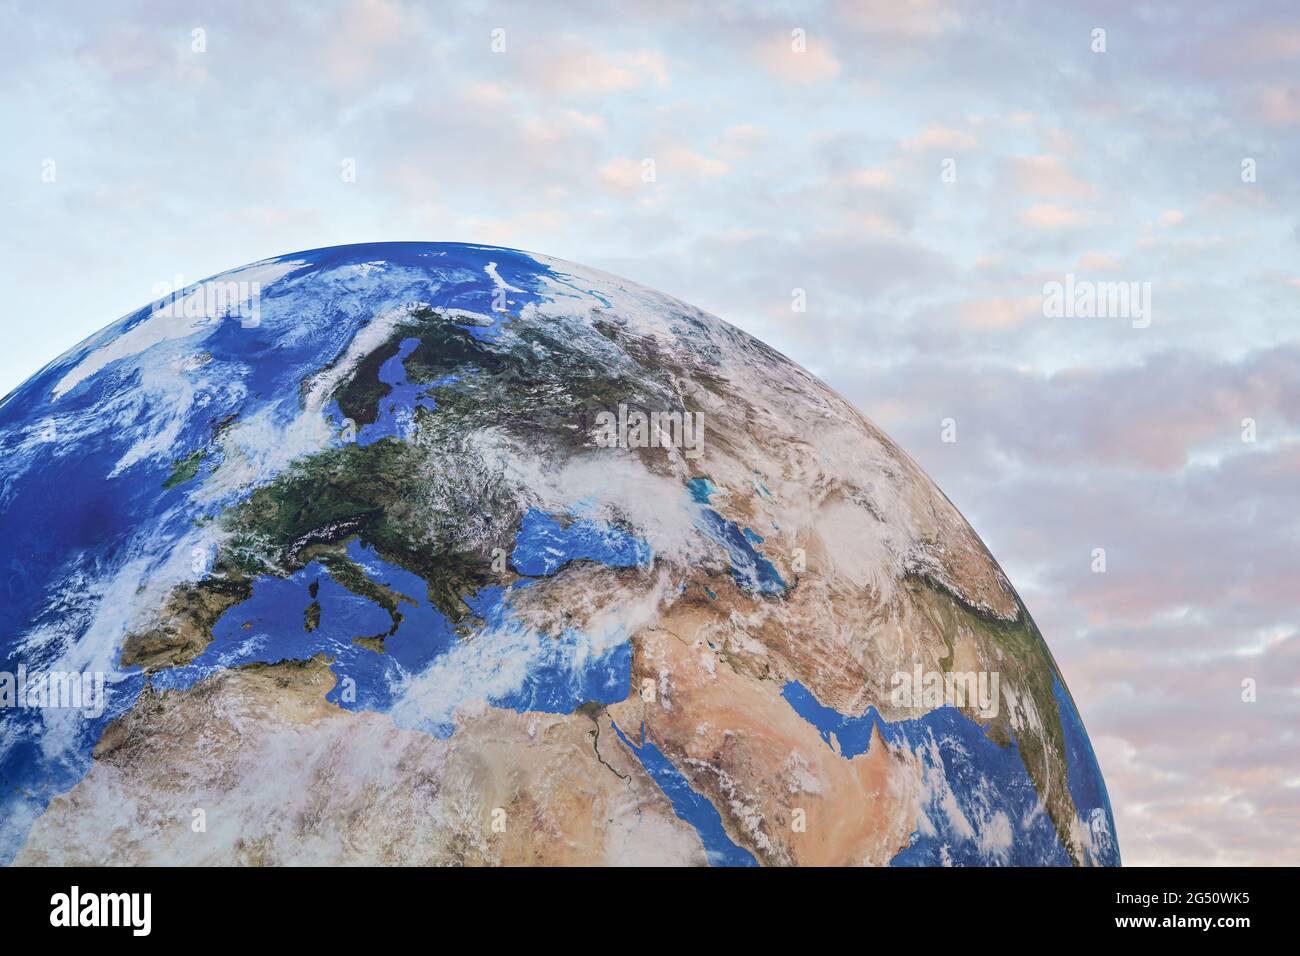 Large inflatable model of planet Earth, detail on Europe, small pink sunset clouds in background Stock Photo